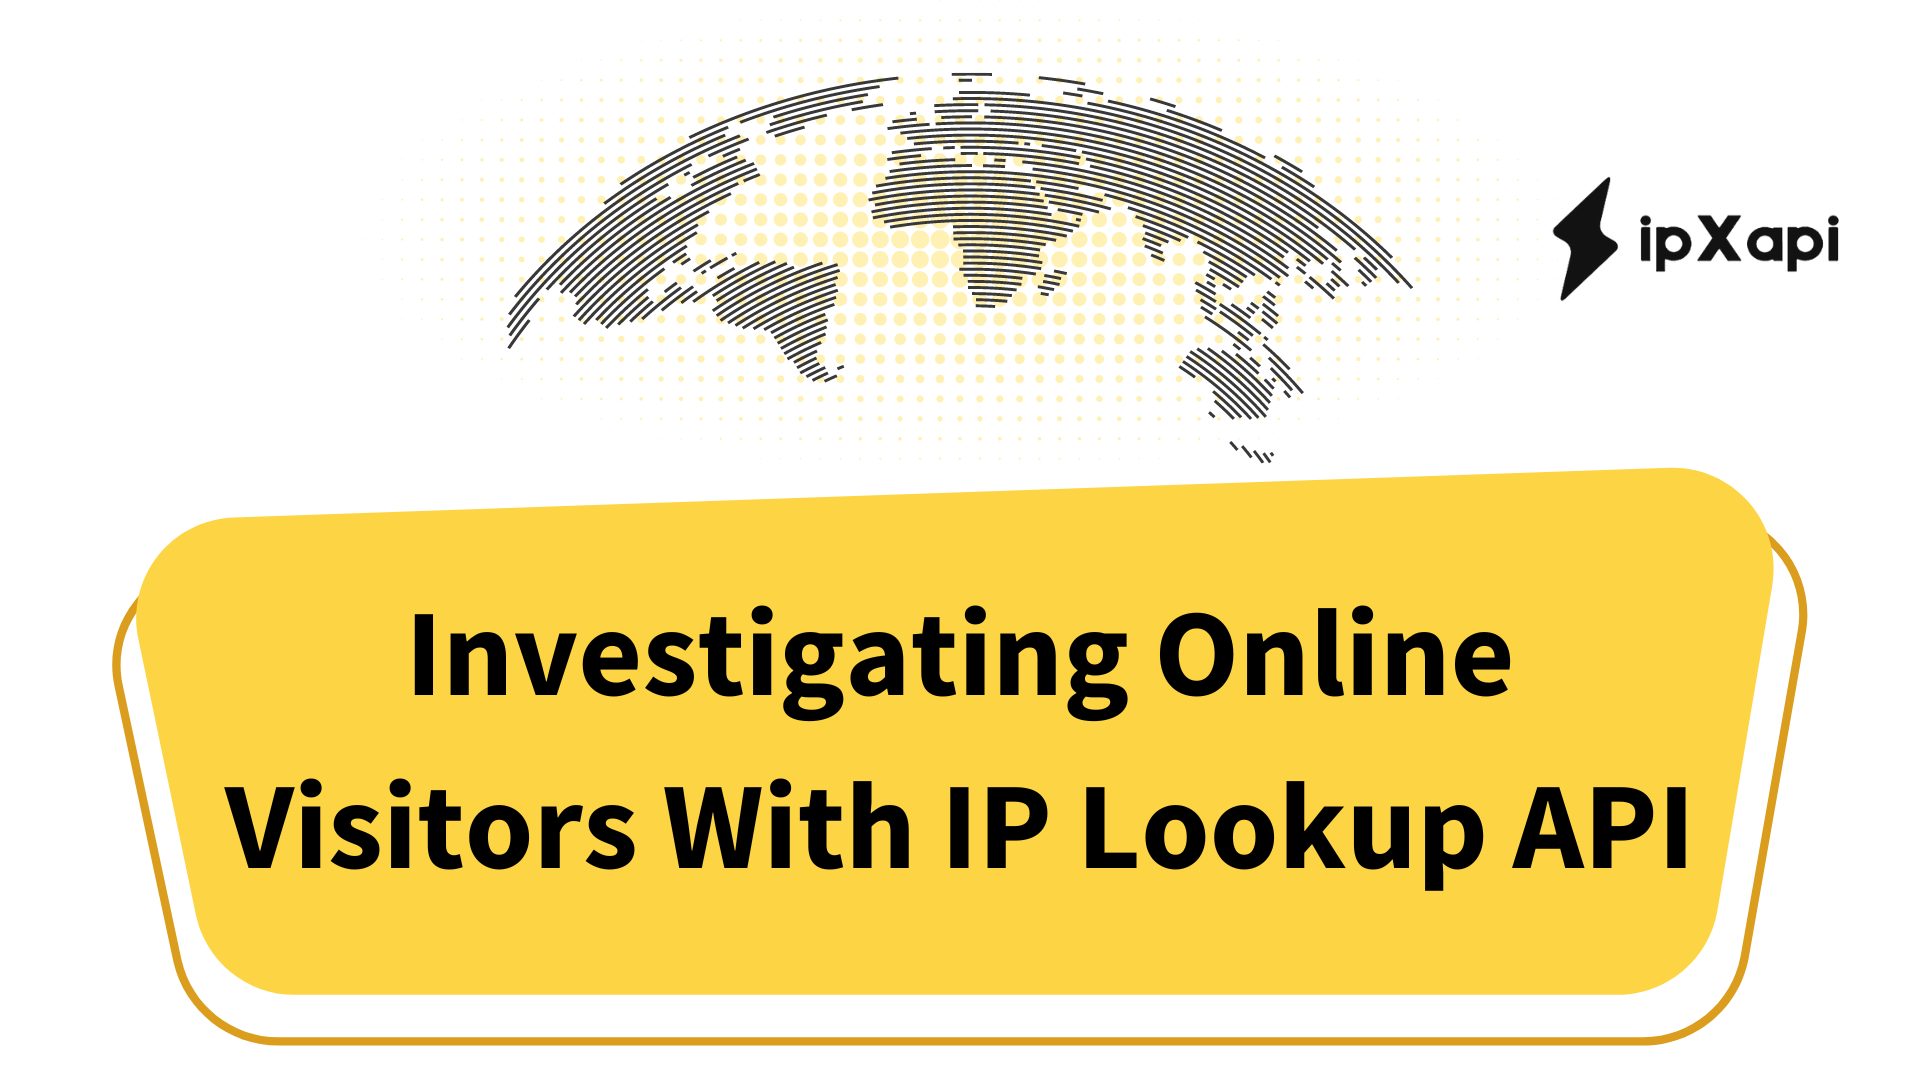 Investigating Online Visitors With IP Lookup API